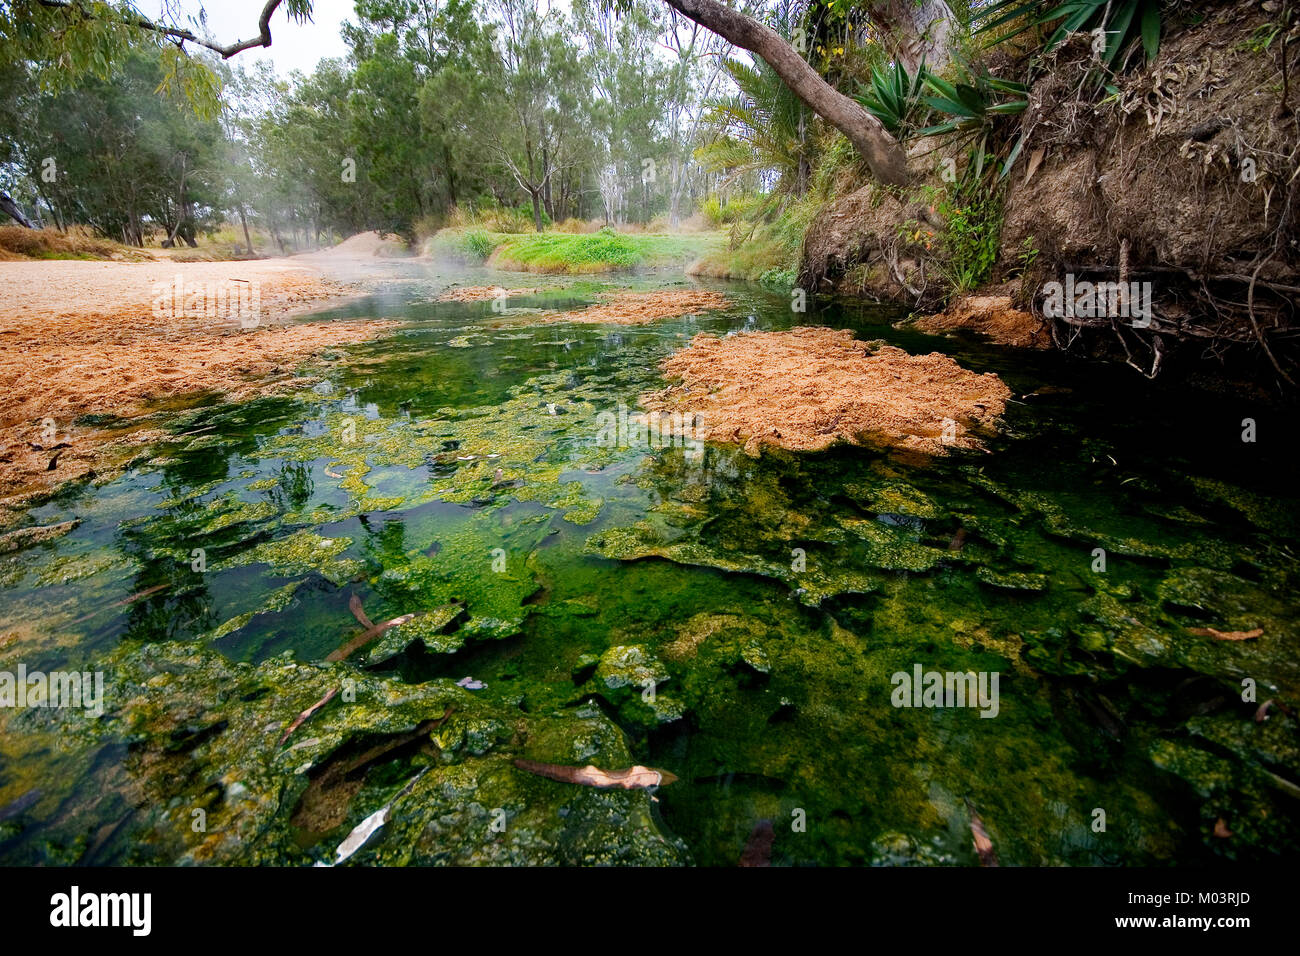 Australia, Queensland, Innot Hot Springs. Hot water provides ideals conditions for algae growth in Nettle Creek on the Savannah Way Stock Photo